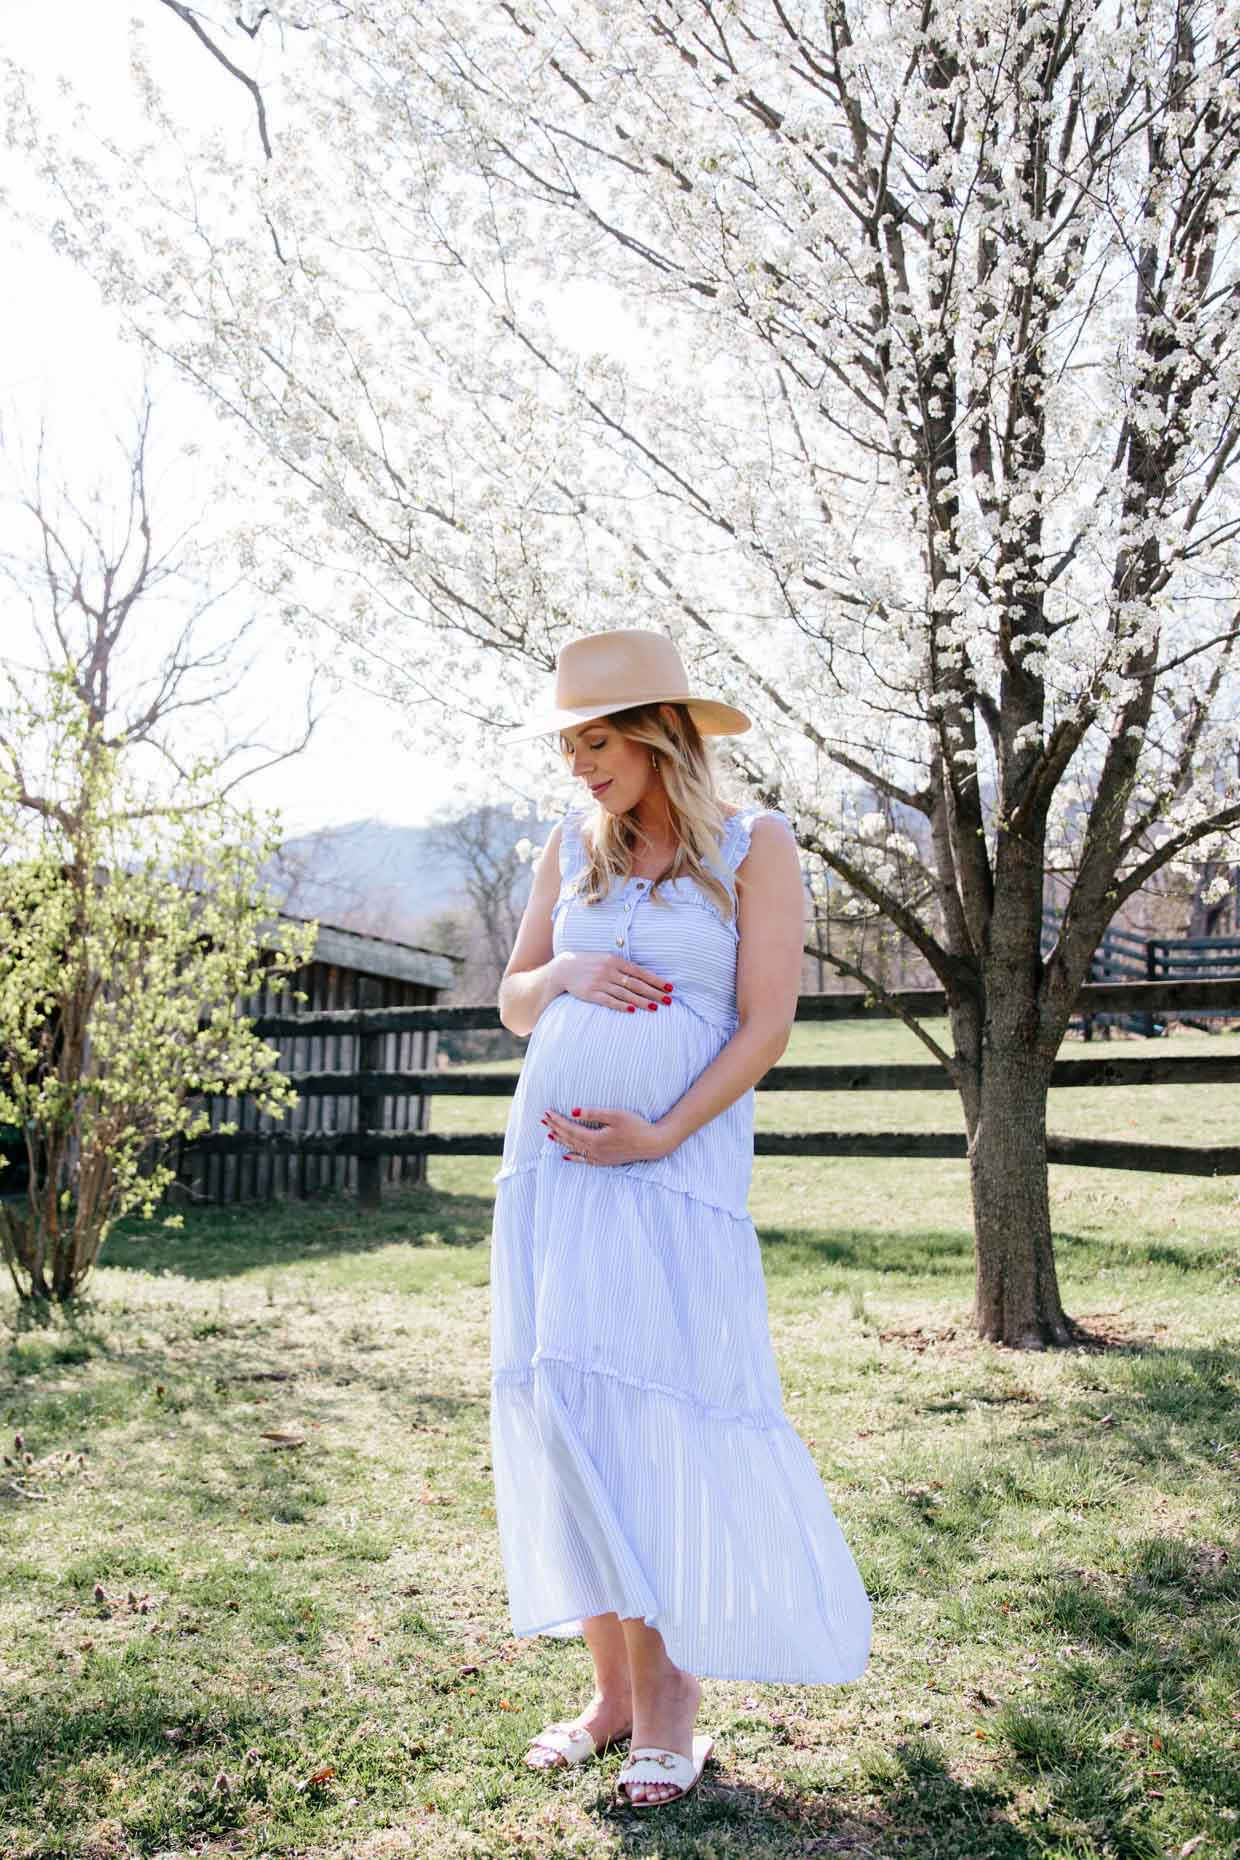 Spring Blooms & A New Sustainable Maternity Brand I'm Loving - Meagan's Moda